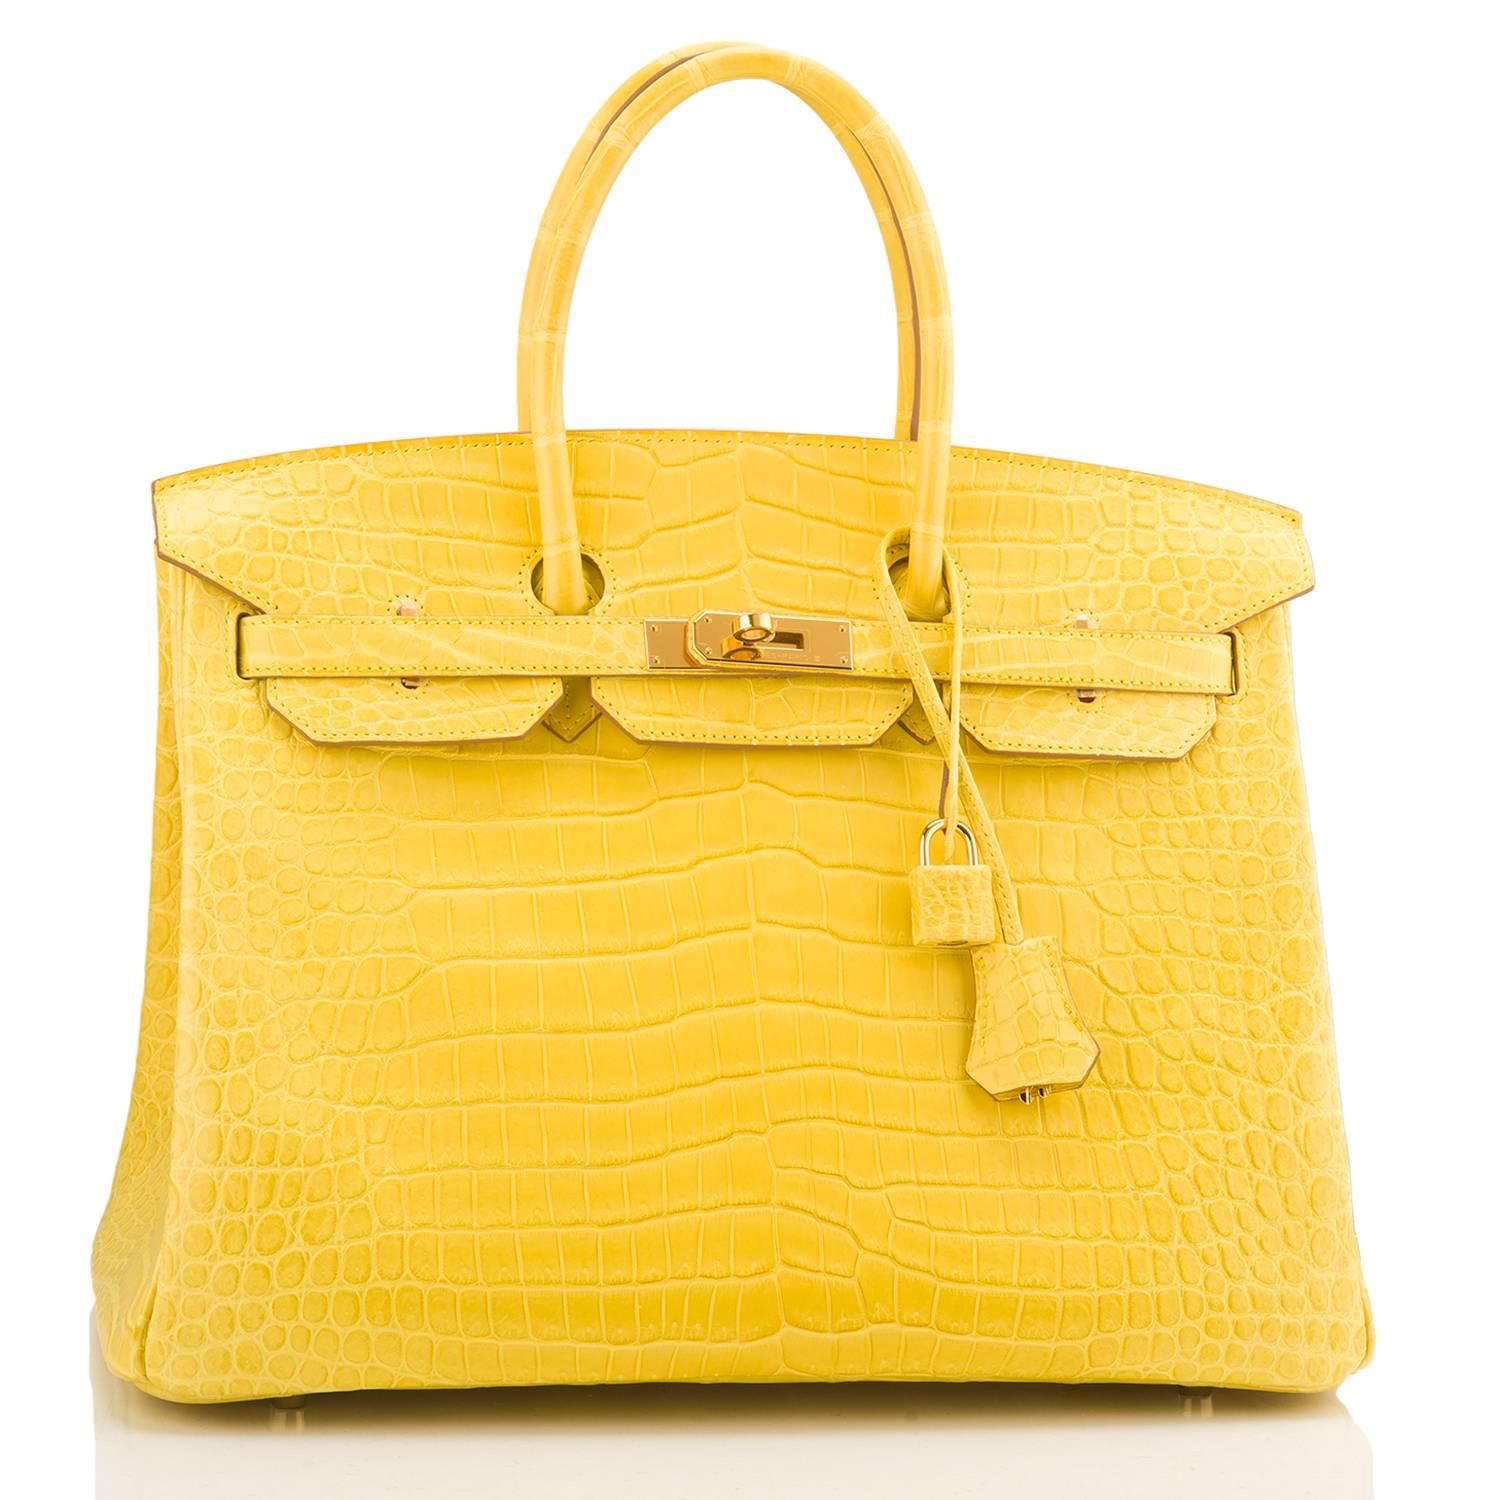 Hermes Mimosa Birkin 35cm of matte porosus crocodile leather with gold hardware.

This Birkin has tonal stitching, a front toggle closure, a clochette with lock and two keys, and double rolled handles.

The interior is lined with Mimosa chevre and